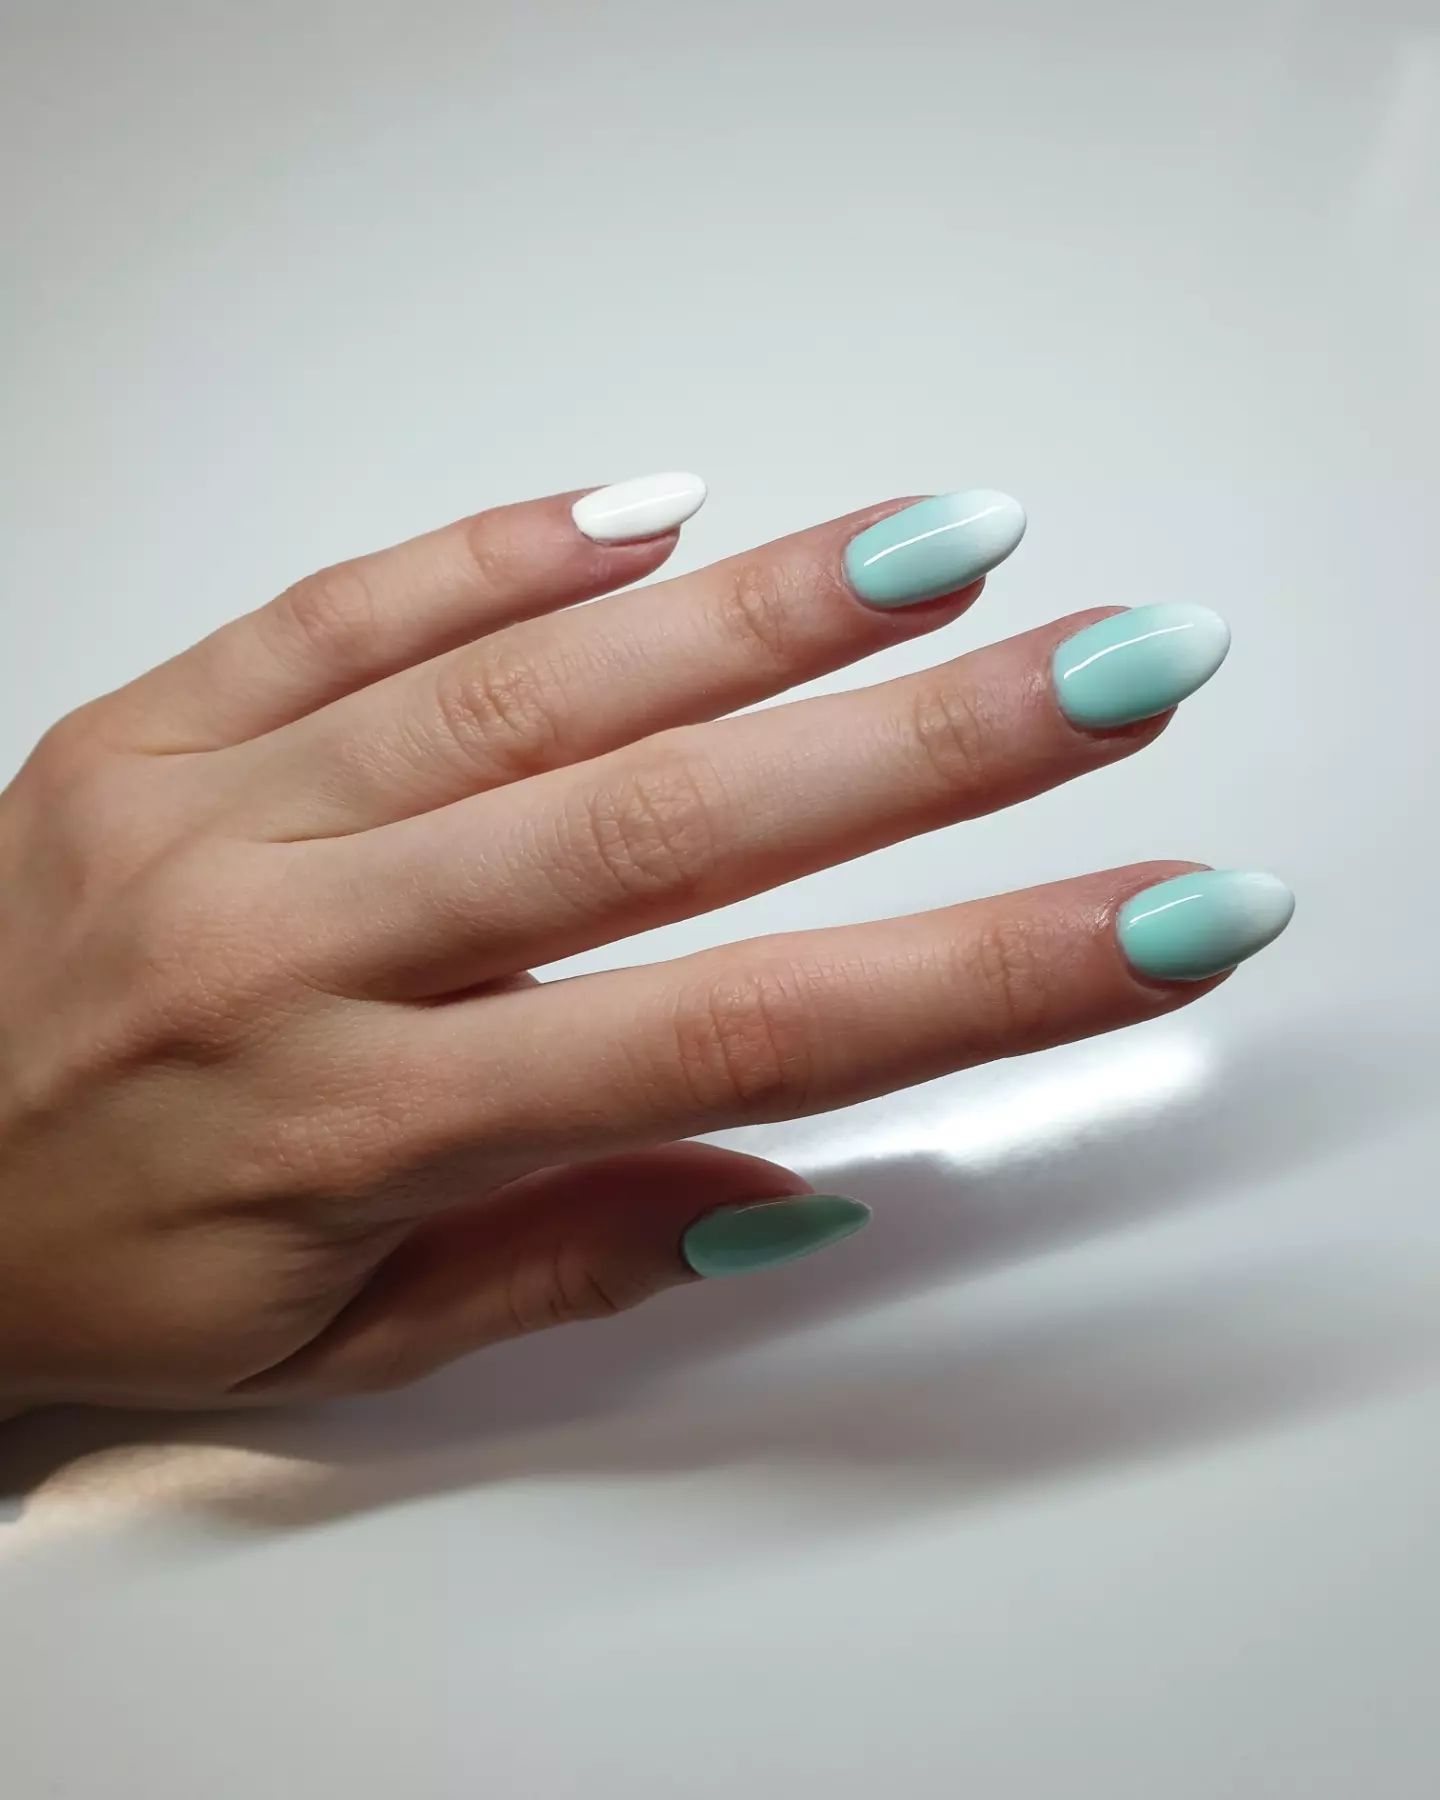  If you like ombre nails, light blue is the perfect color to do so. Mixing white with this color seems like a nice idea to try.